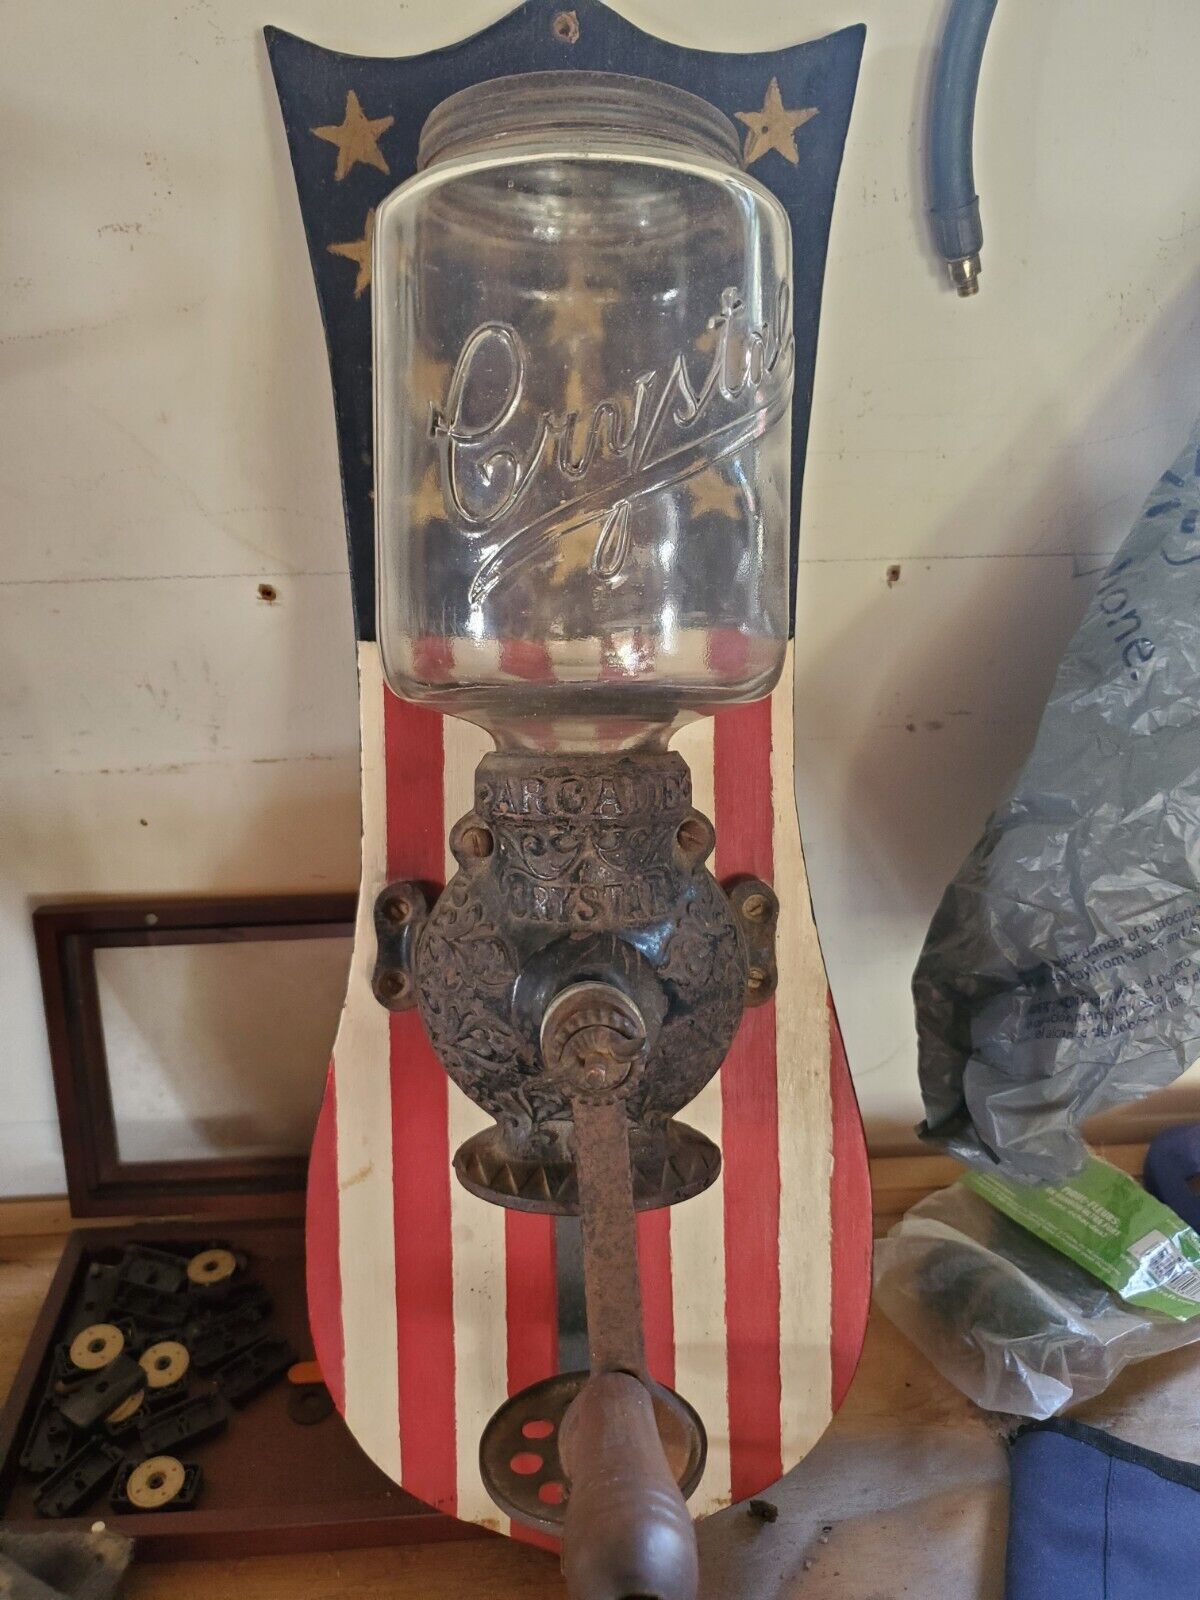 Antique ARCADE CRYSTAL No. 3 Wall Mount Cast Iron Coffee Bean Grinder, Catch Cup